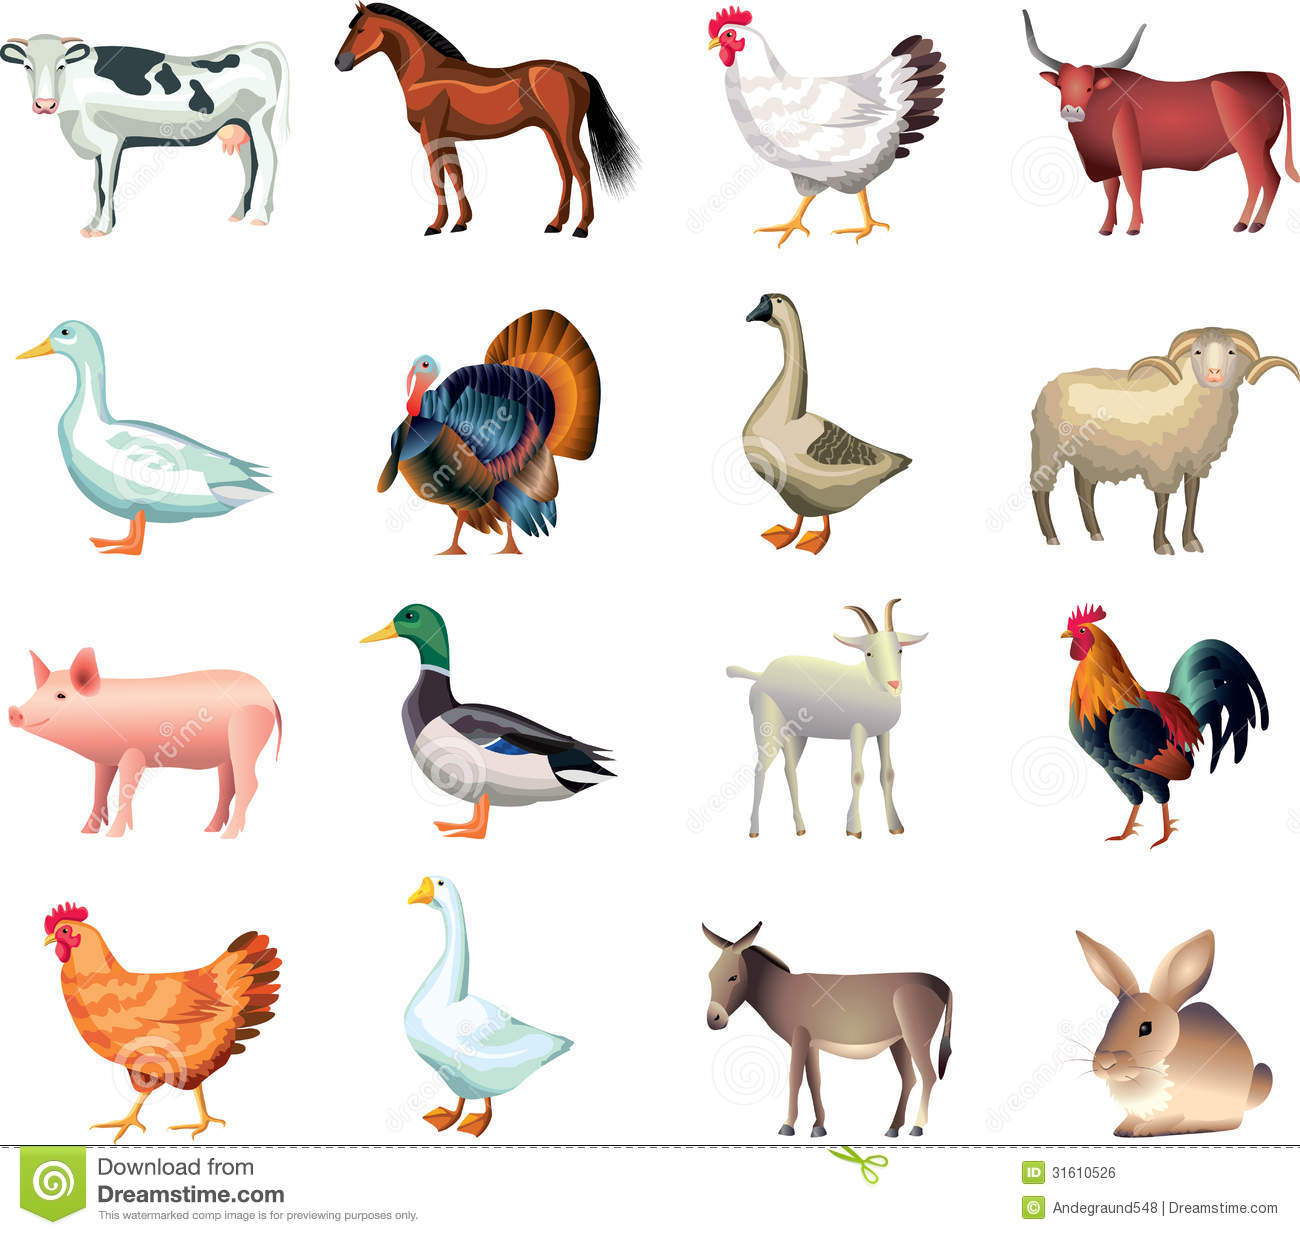 Realistic Animal Clipart Free.